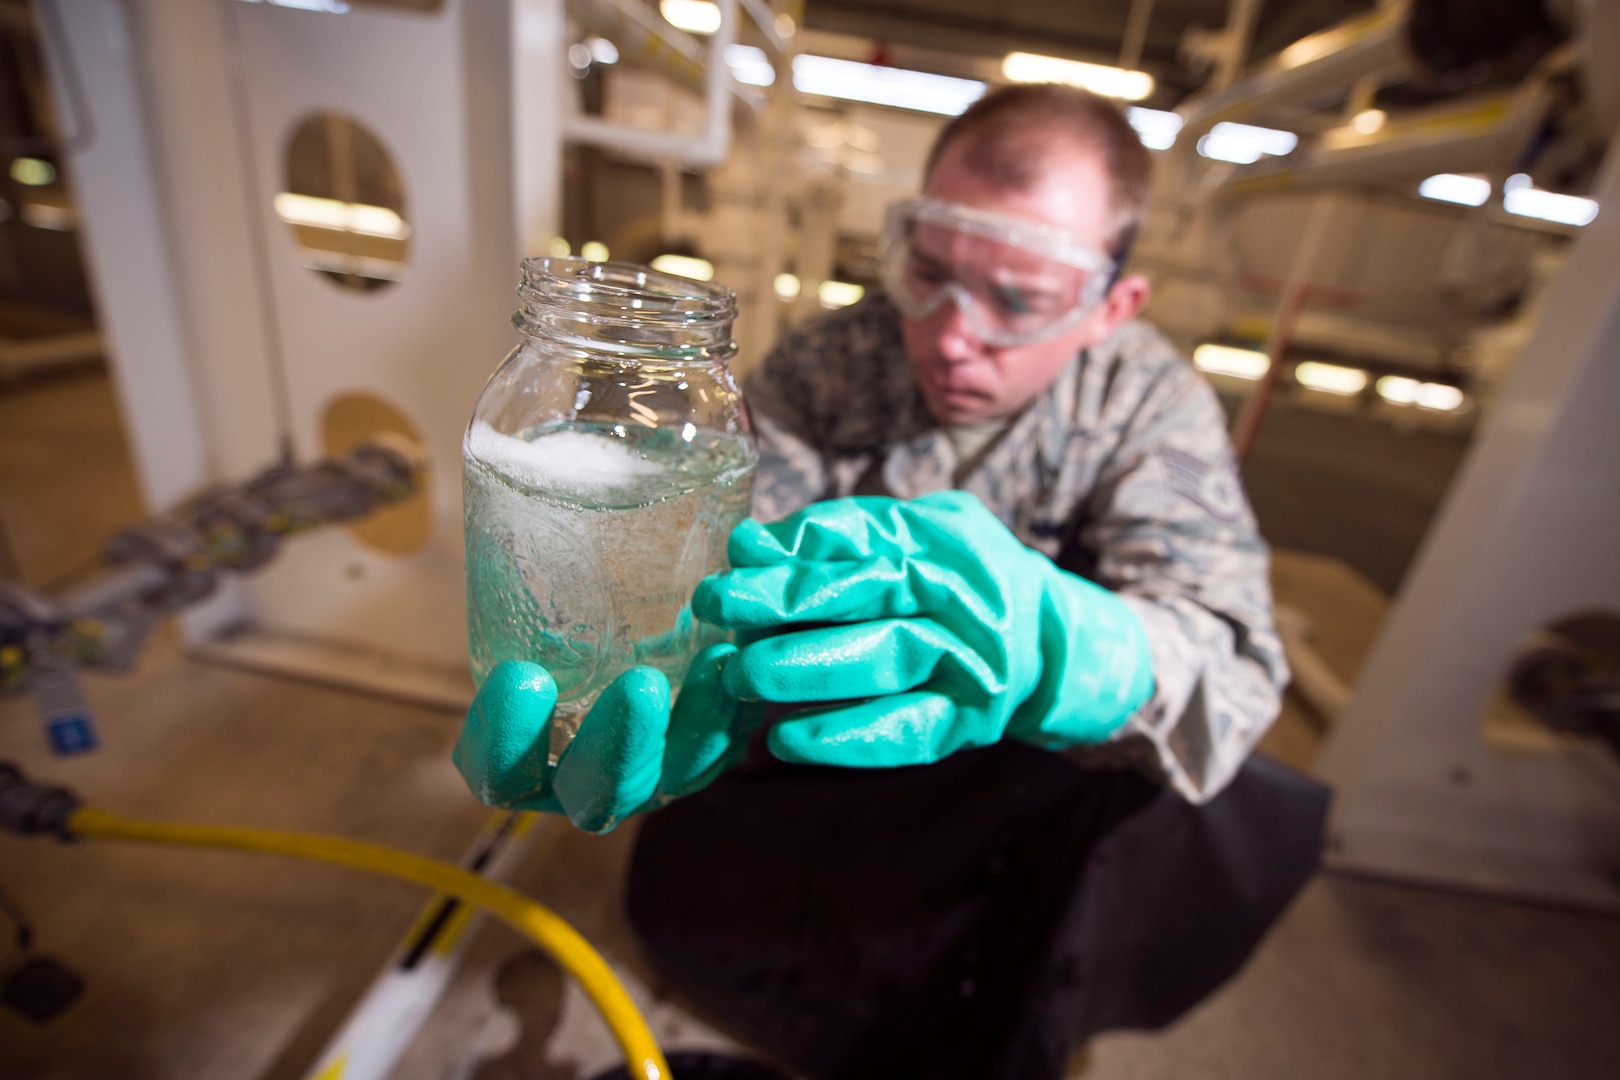 U.S. Air Force Staff Sgt. Charles Arndt, 100th Logistics Readiness Squadron Fuels Facilities supervisor, checks the quality of a fuel sample at RAF Mildenhall, England, Oct. 9, 2018. When checking fuel samples, fuels facilities Airmen check for sediments or water contamination. (U.S. Air Force photo by Staff Sgt. Christine Groening)